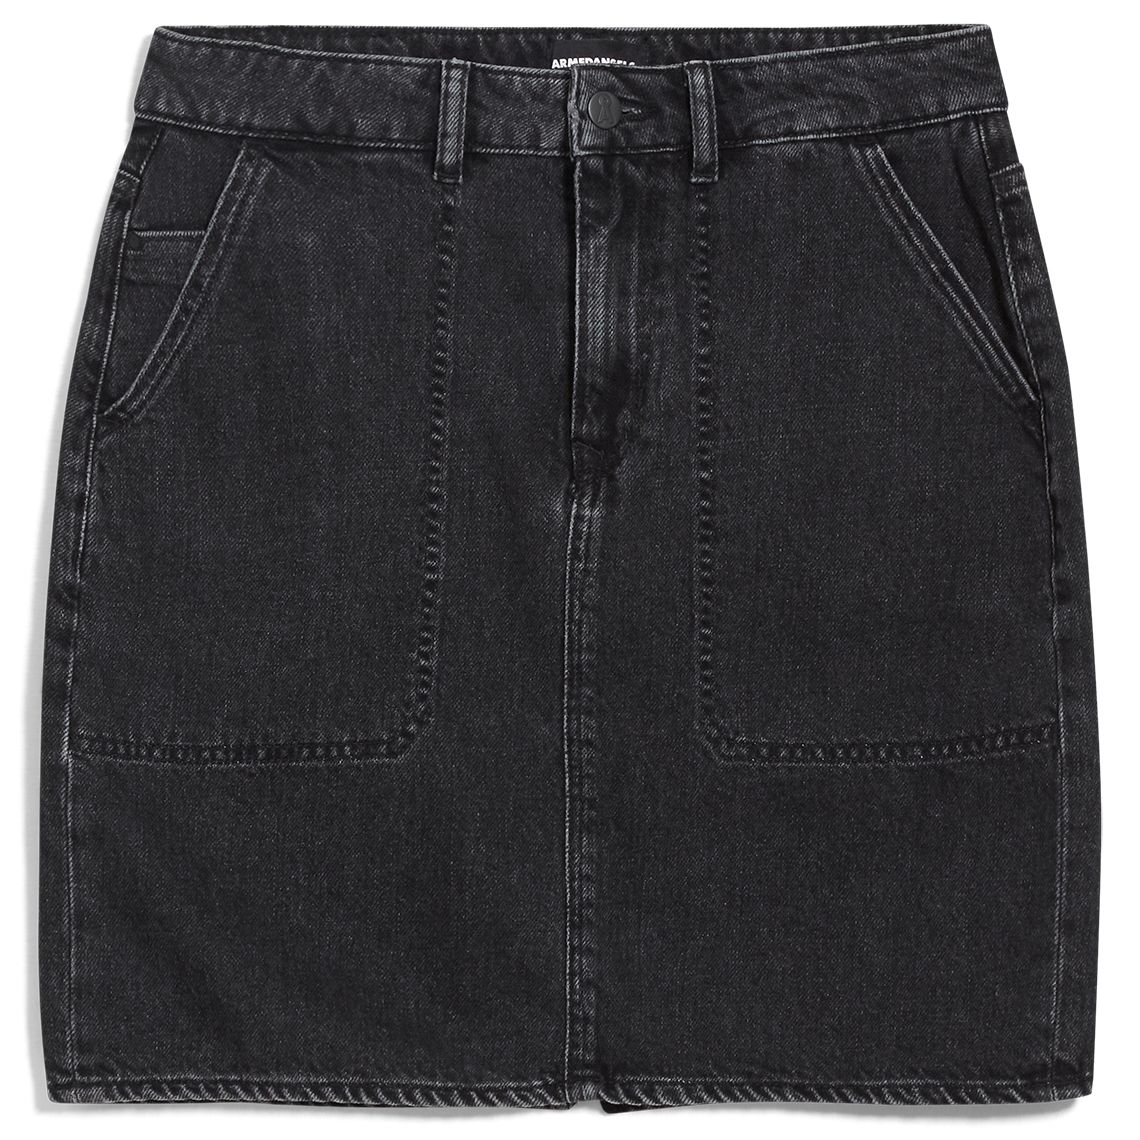 Jeans-Rock AAVENIA washed down black